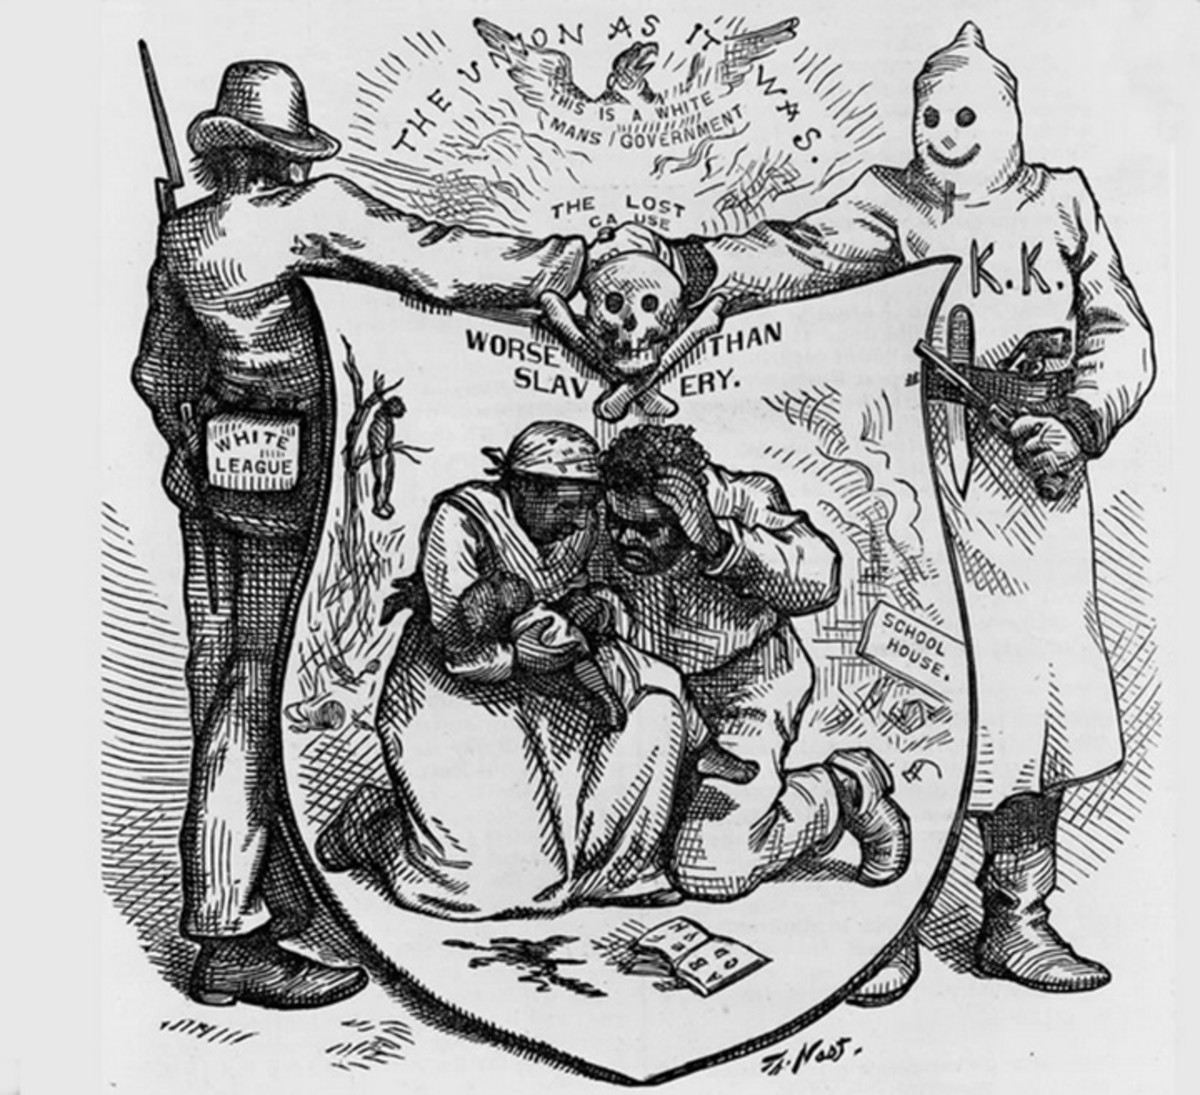 White Democracy Advocated in the South